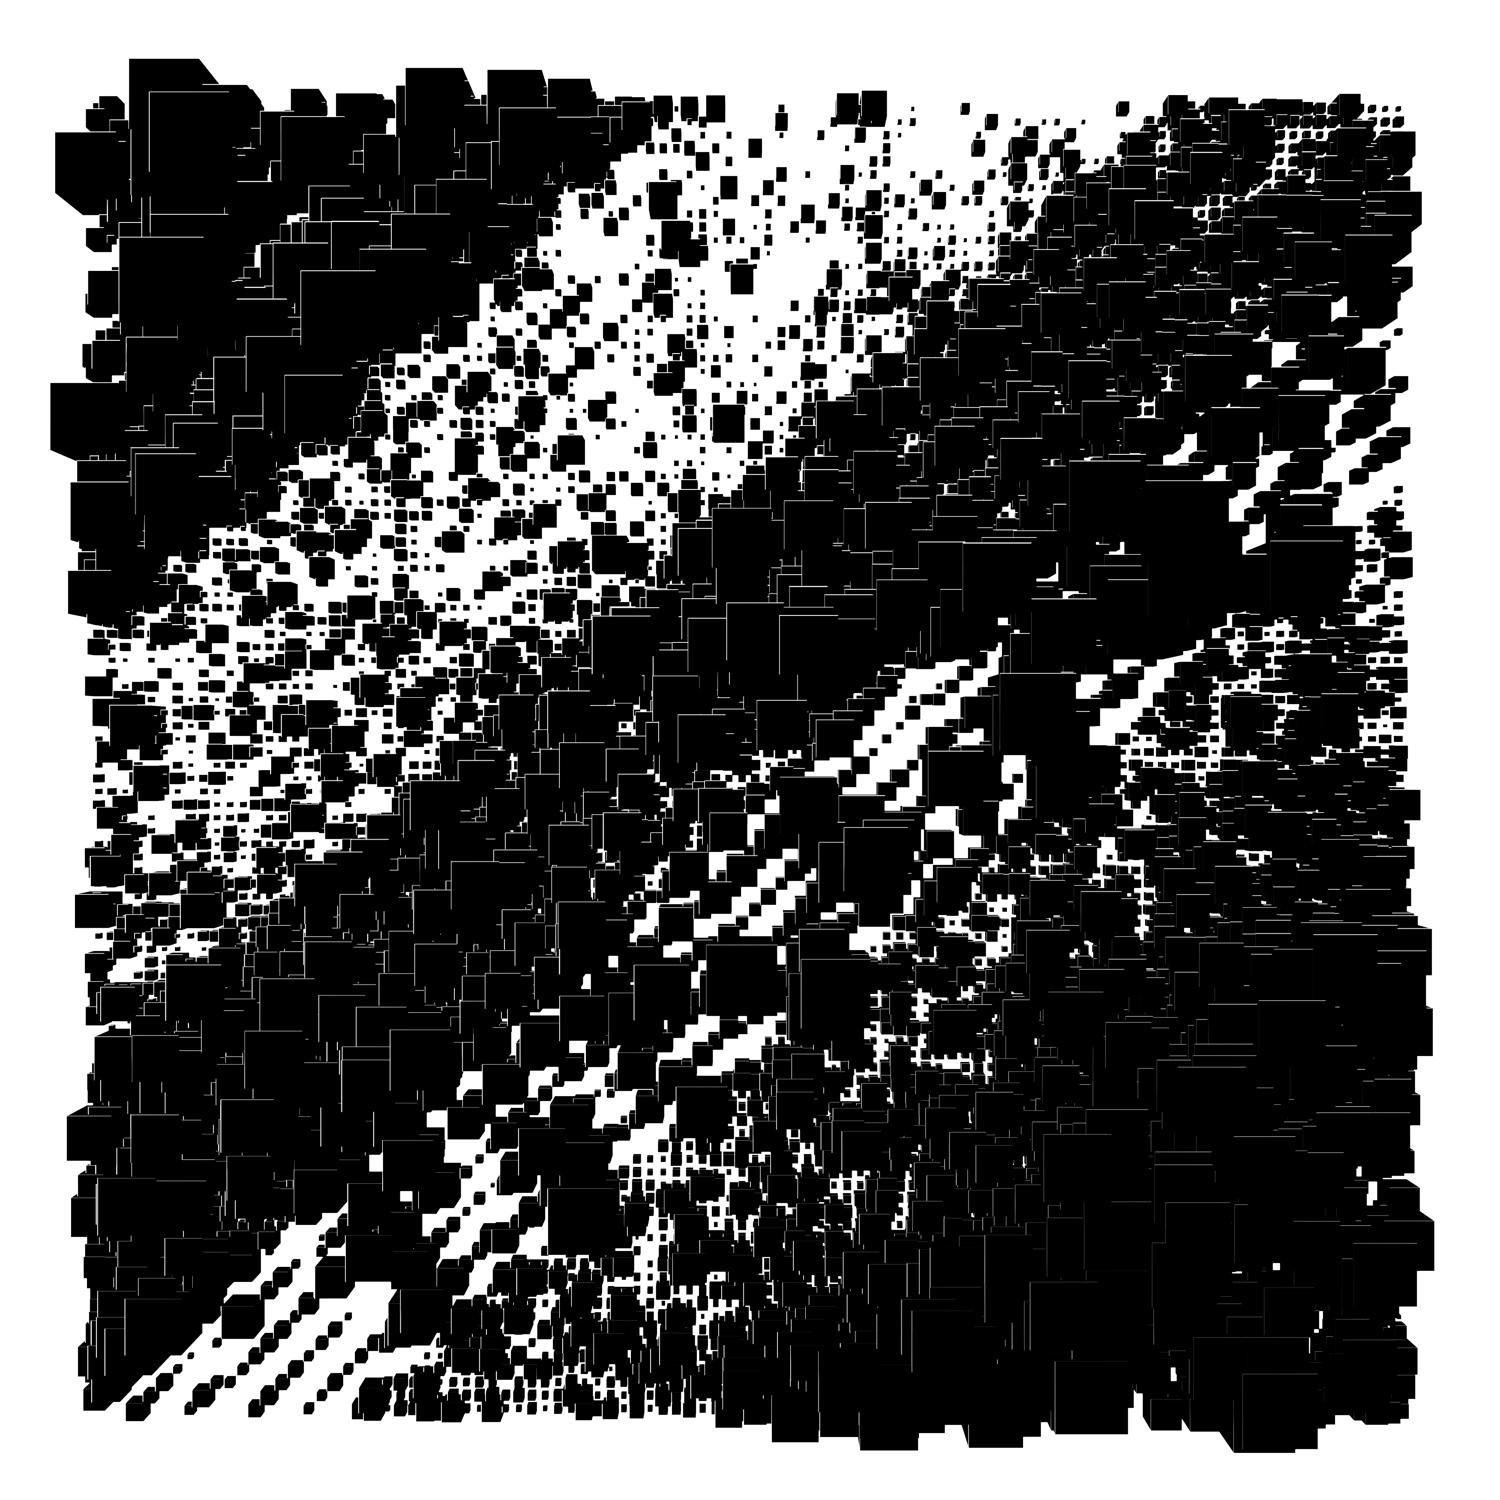 An 3D abstract rendering of black squares on a white background in a random pattern